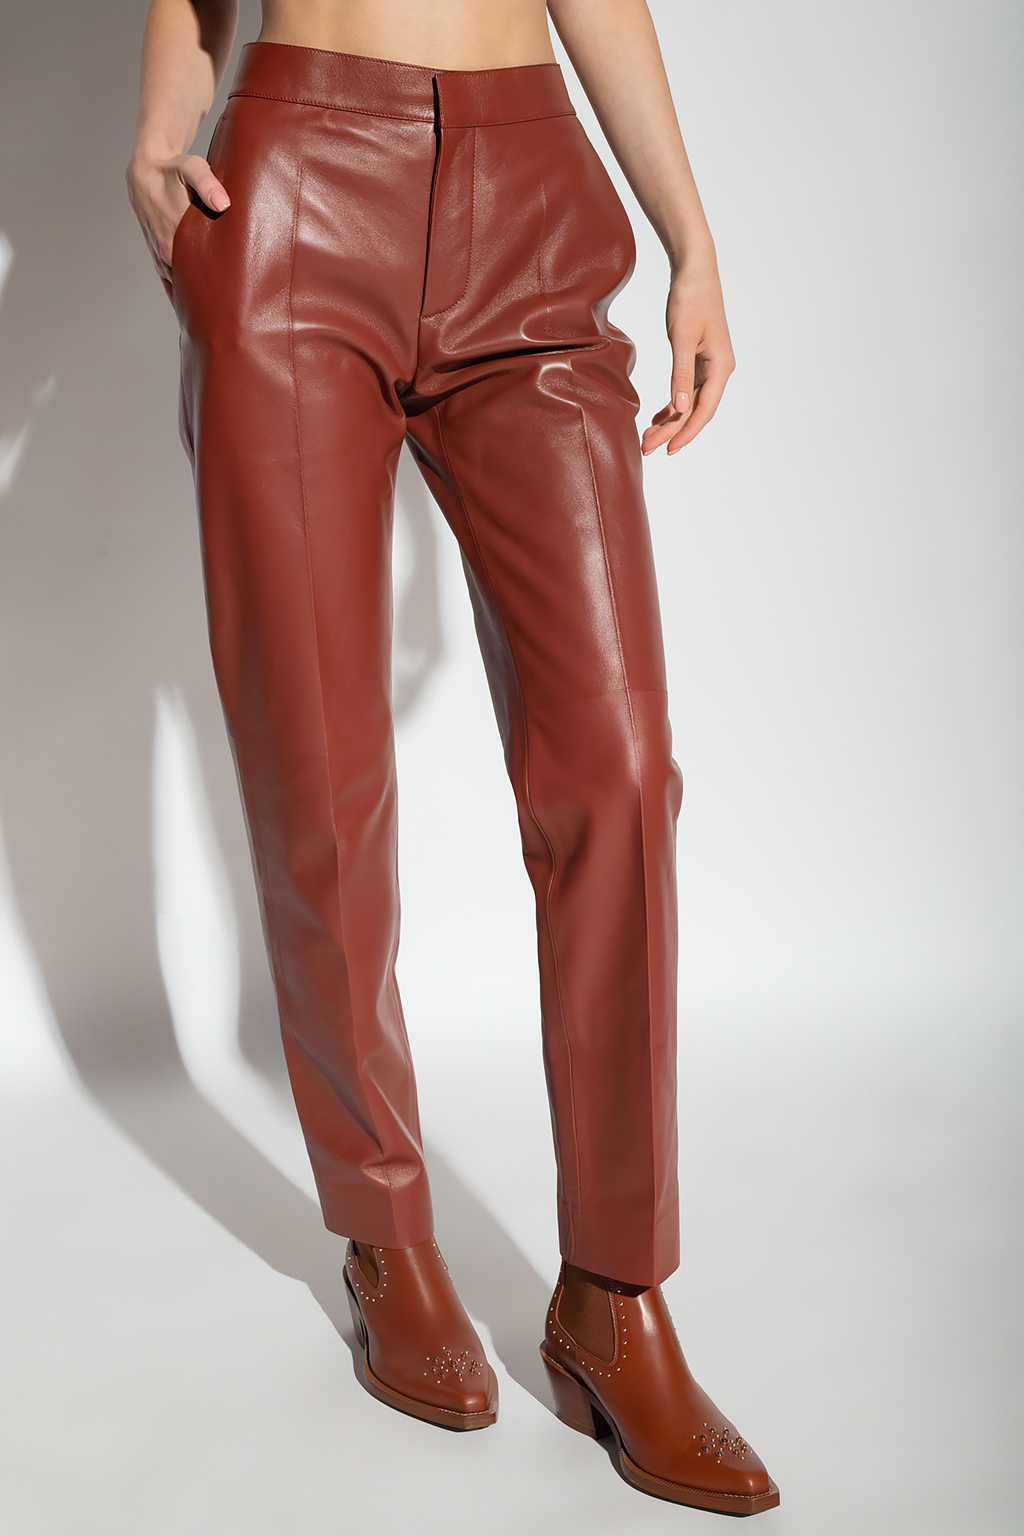 Cotton And Linen Bermuda-shorts - Brown Leather trousers Chloé -  GenesinlifeShops Spain